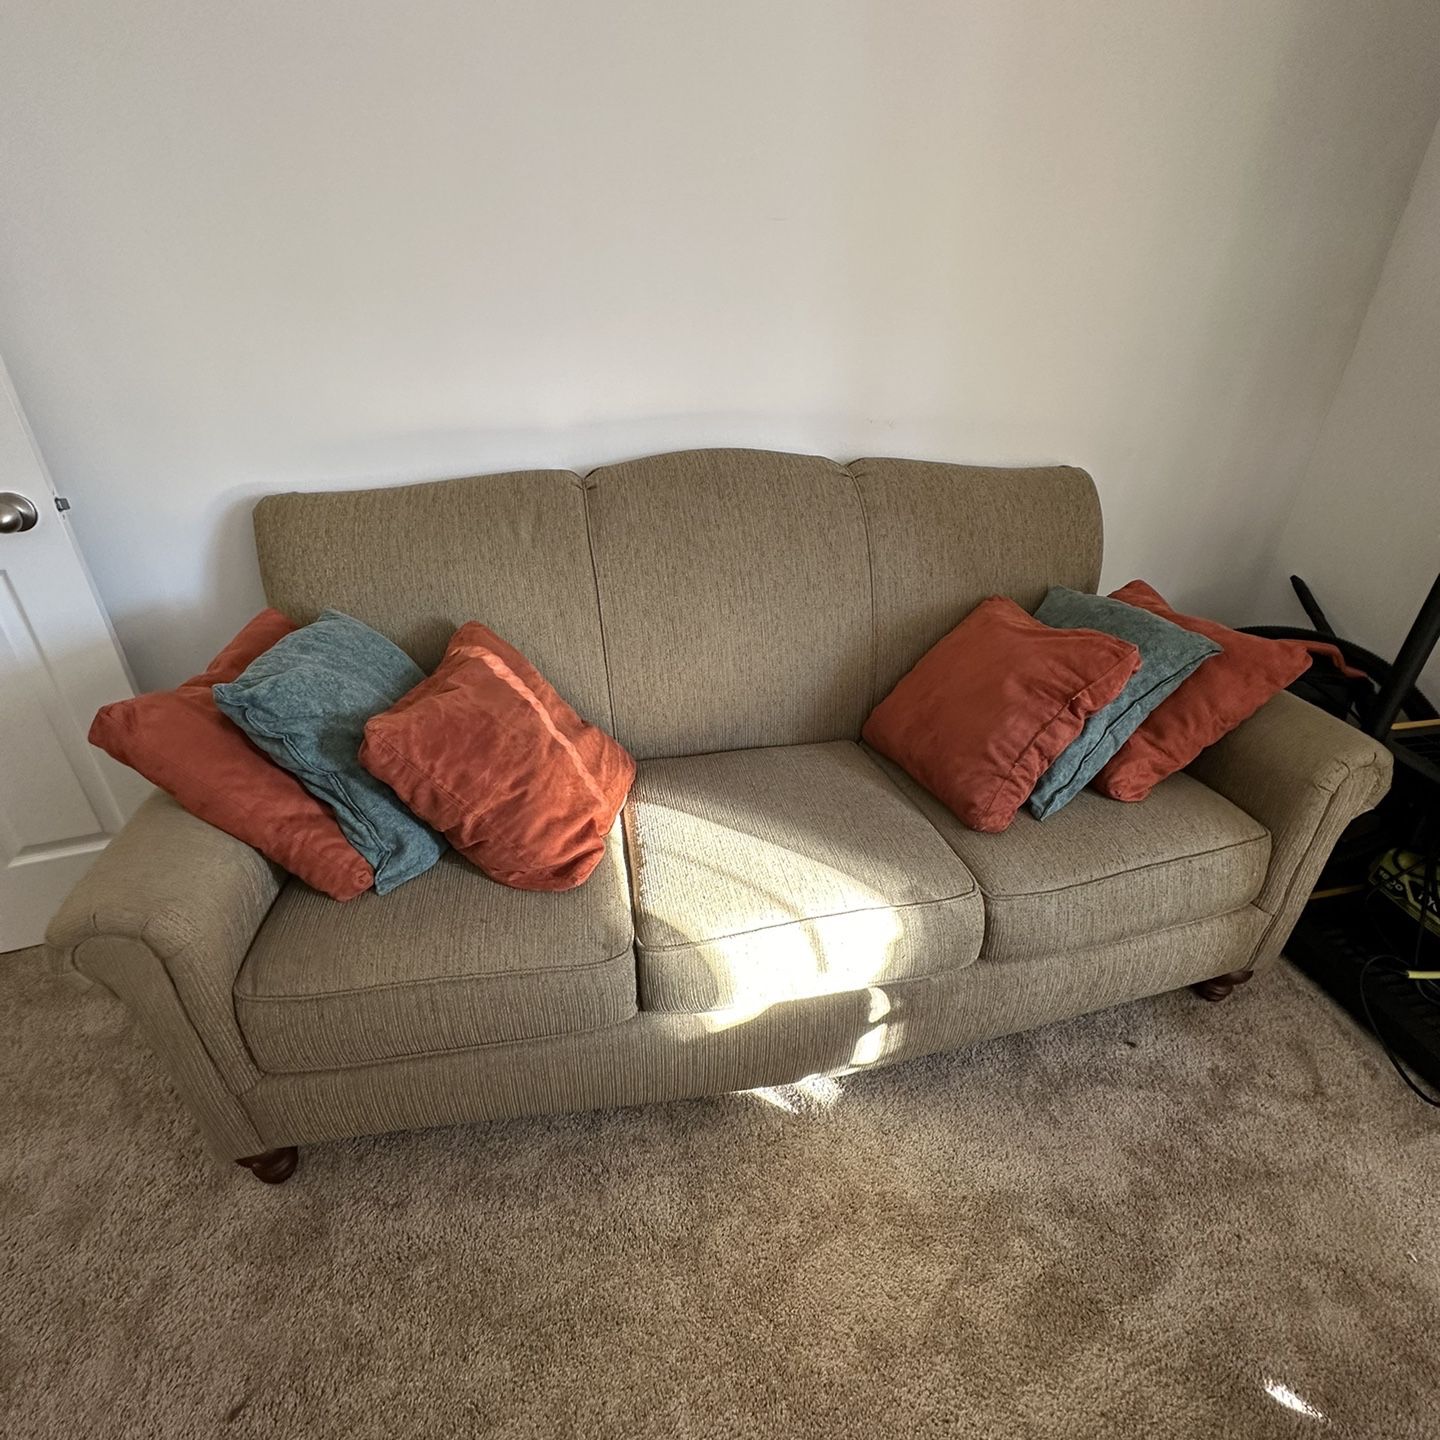 Used Couch For Sale